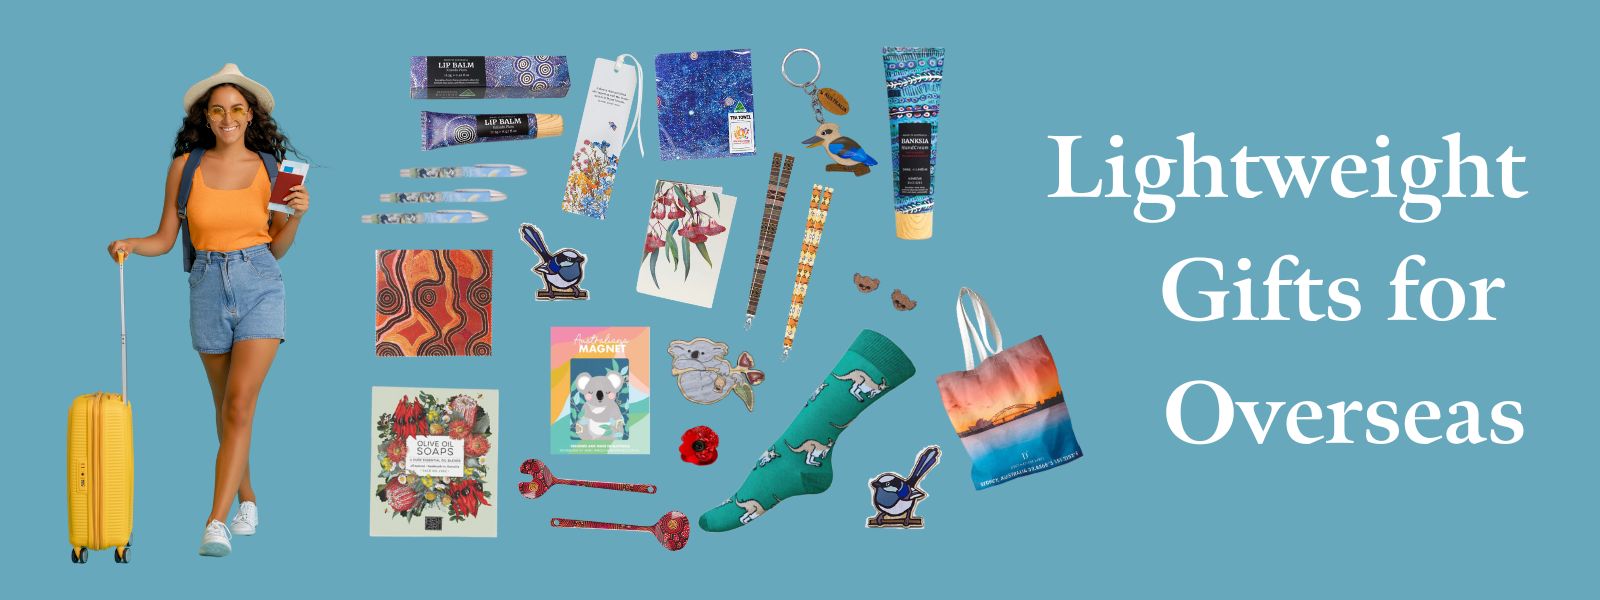 Lightweight Gifts for overseas